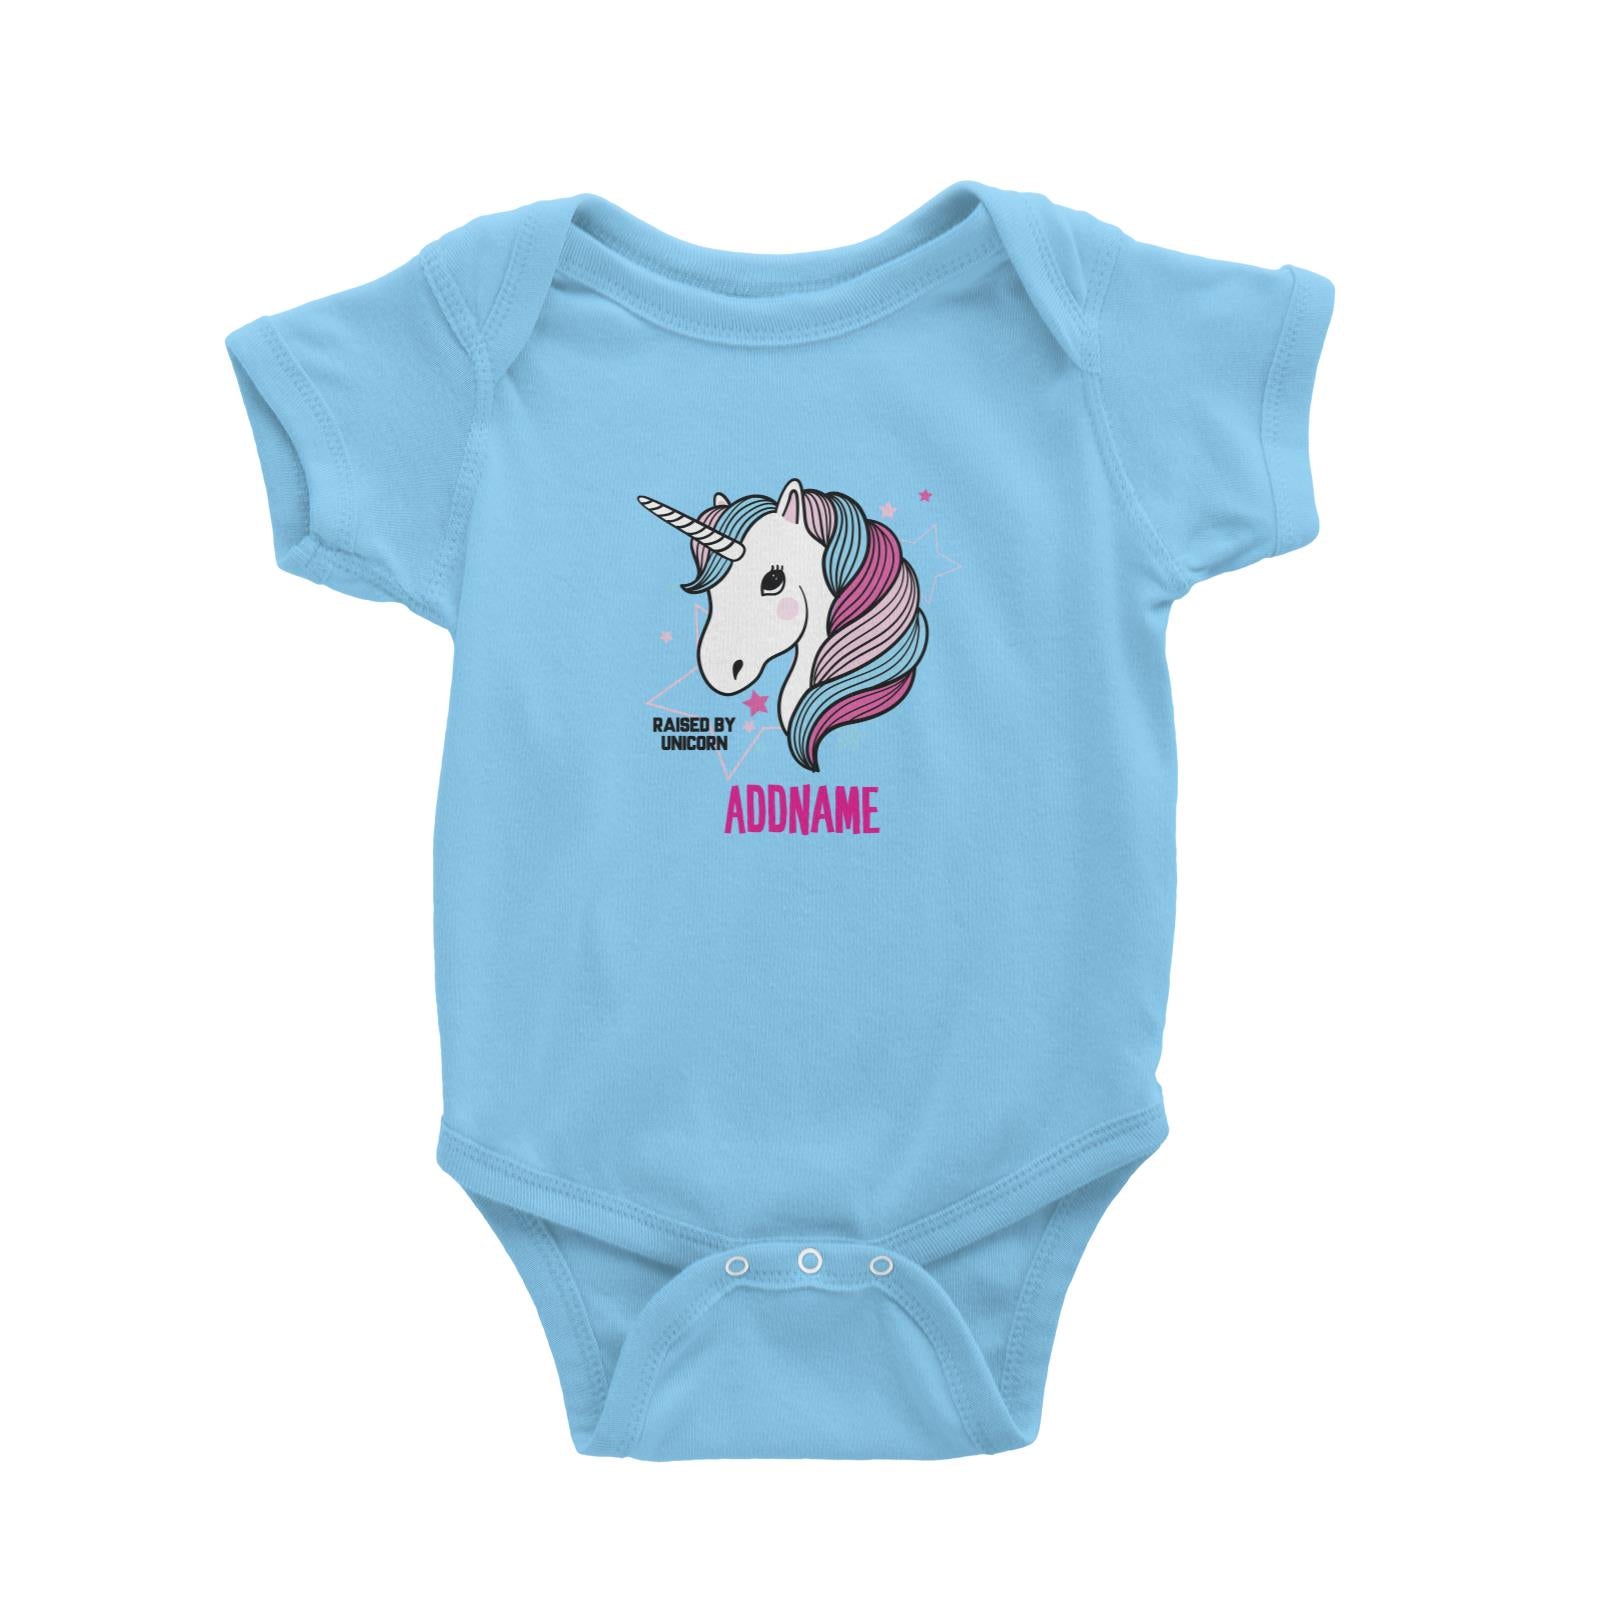 Cool Vibrant Series Raised By Unicorn Addname Baby Romper